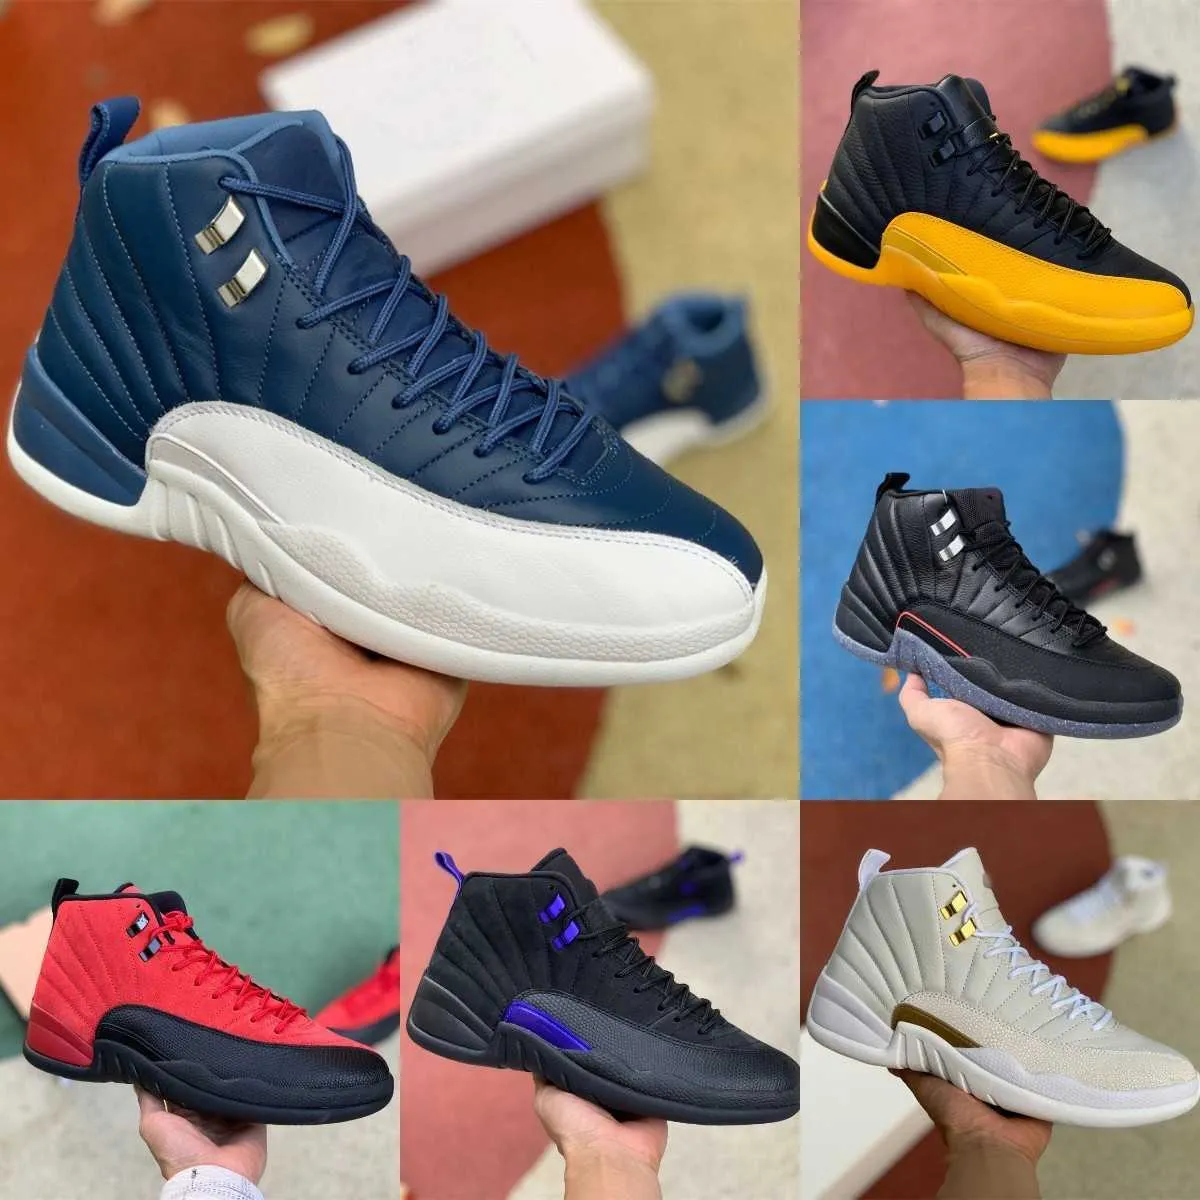 Jumpman Utility Grind 12 12s Mens High Basketball Shoes Twist Gold Indigo Flu Game Dark Concord Royalty OVO White The Master Taxi Fiba Gamma Blue Trainer Sneakers S05